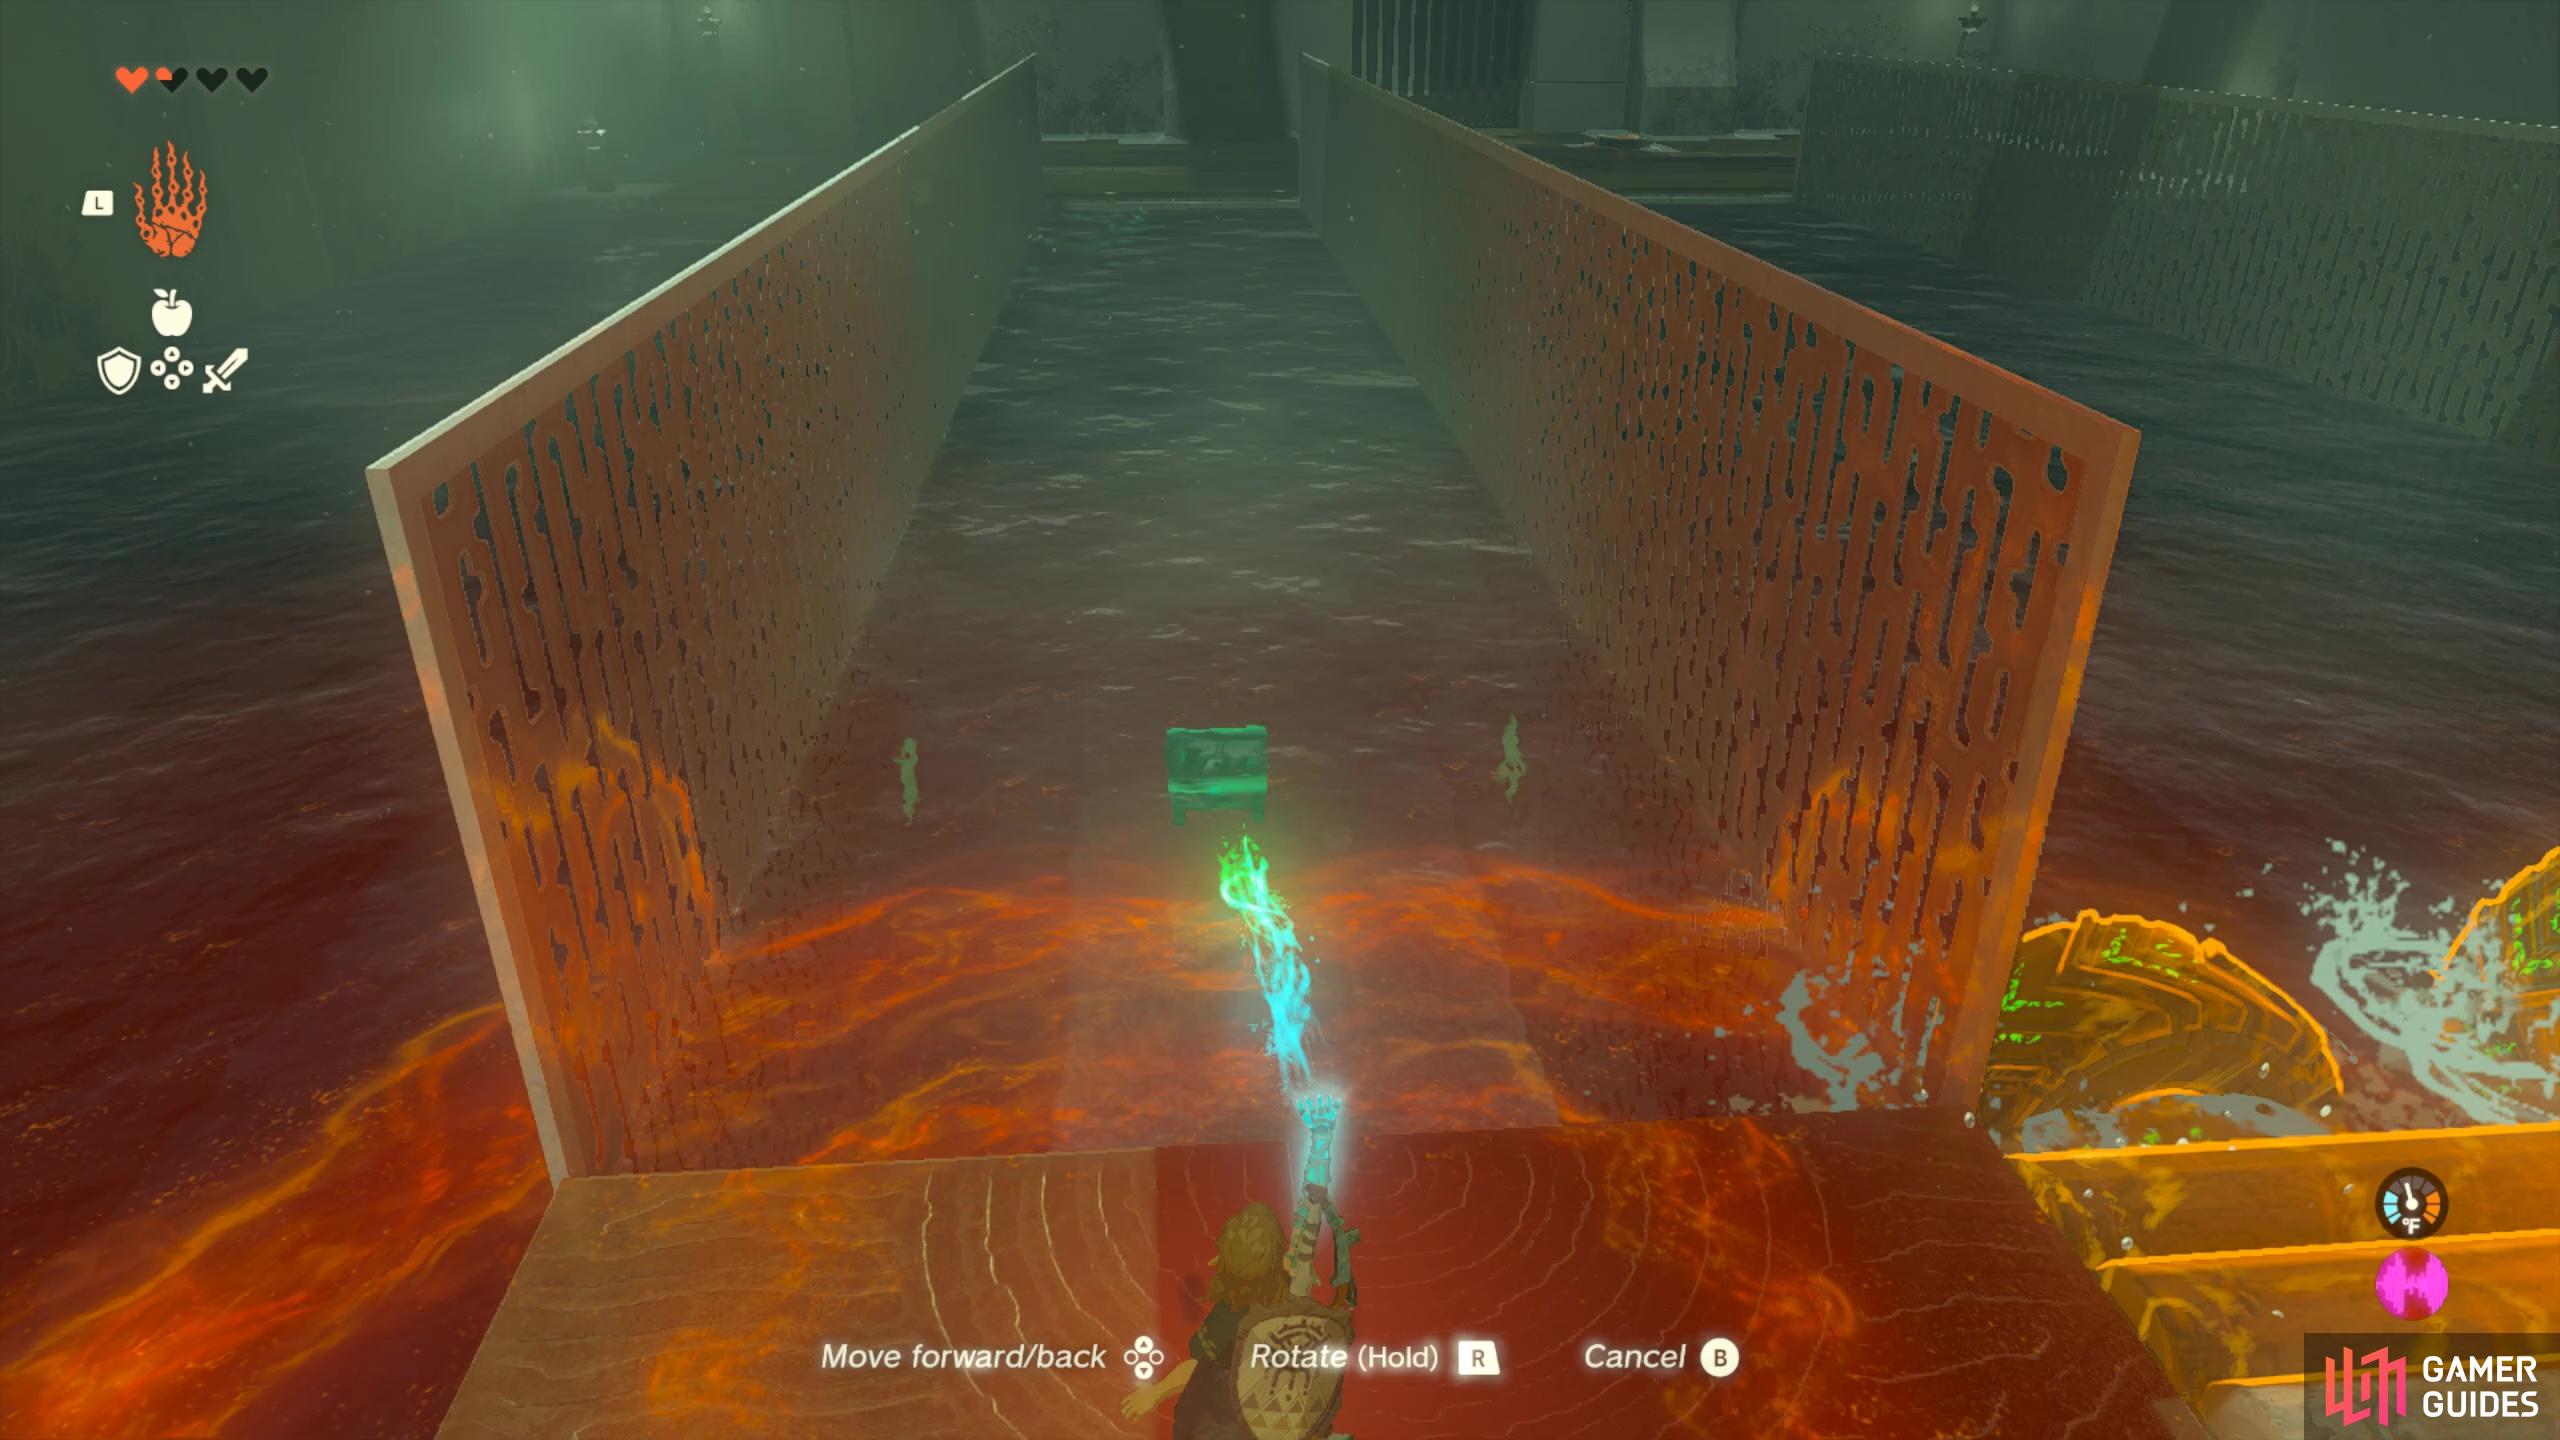 There is a chest hidden at the bottom of the water!